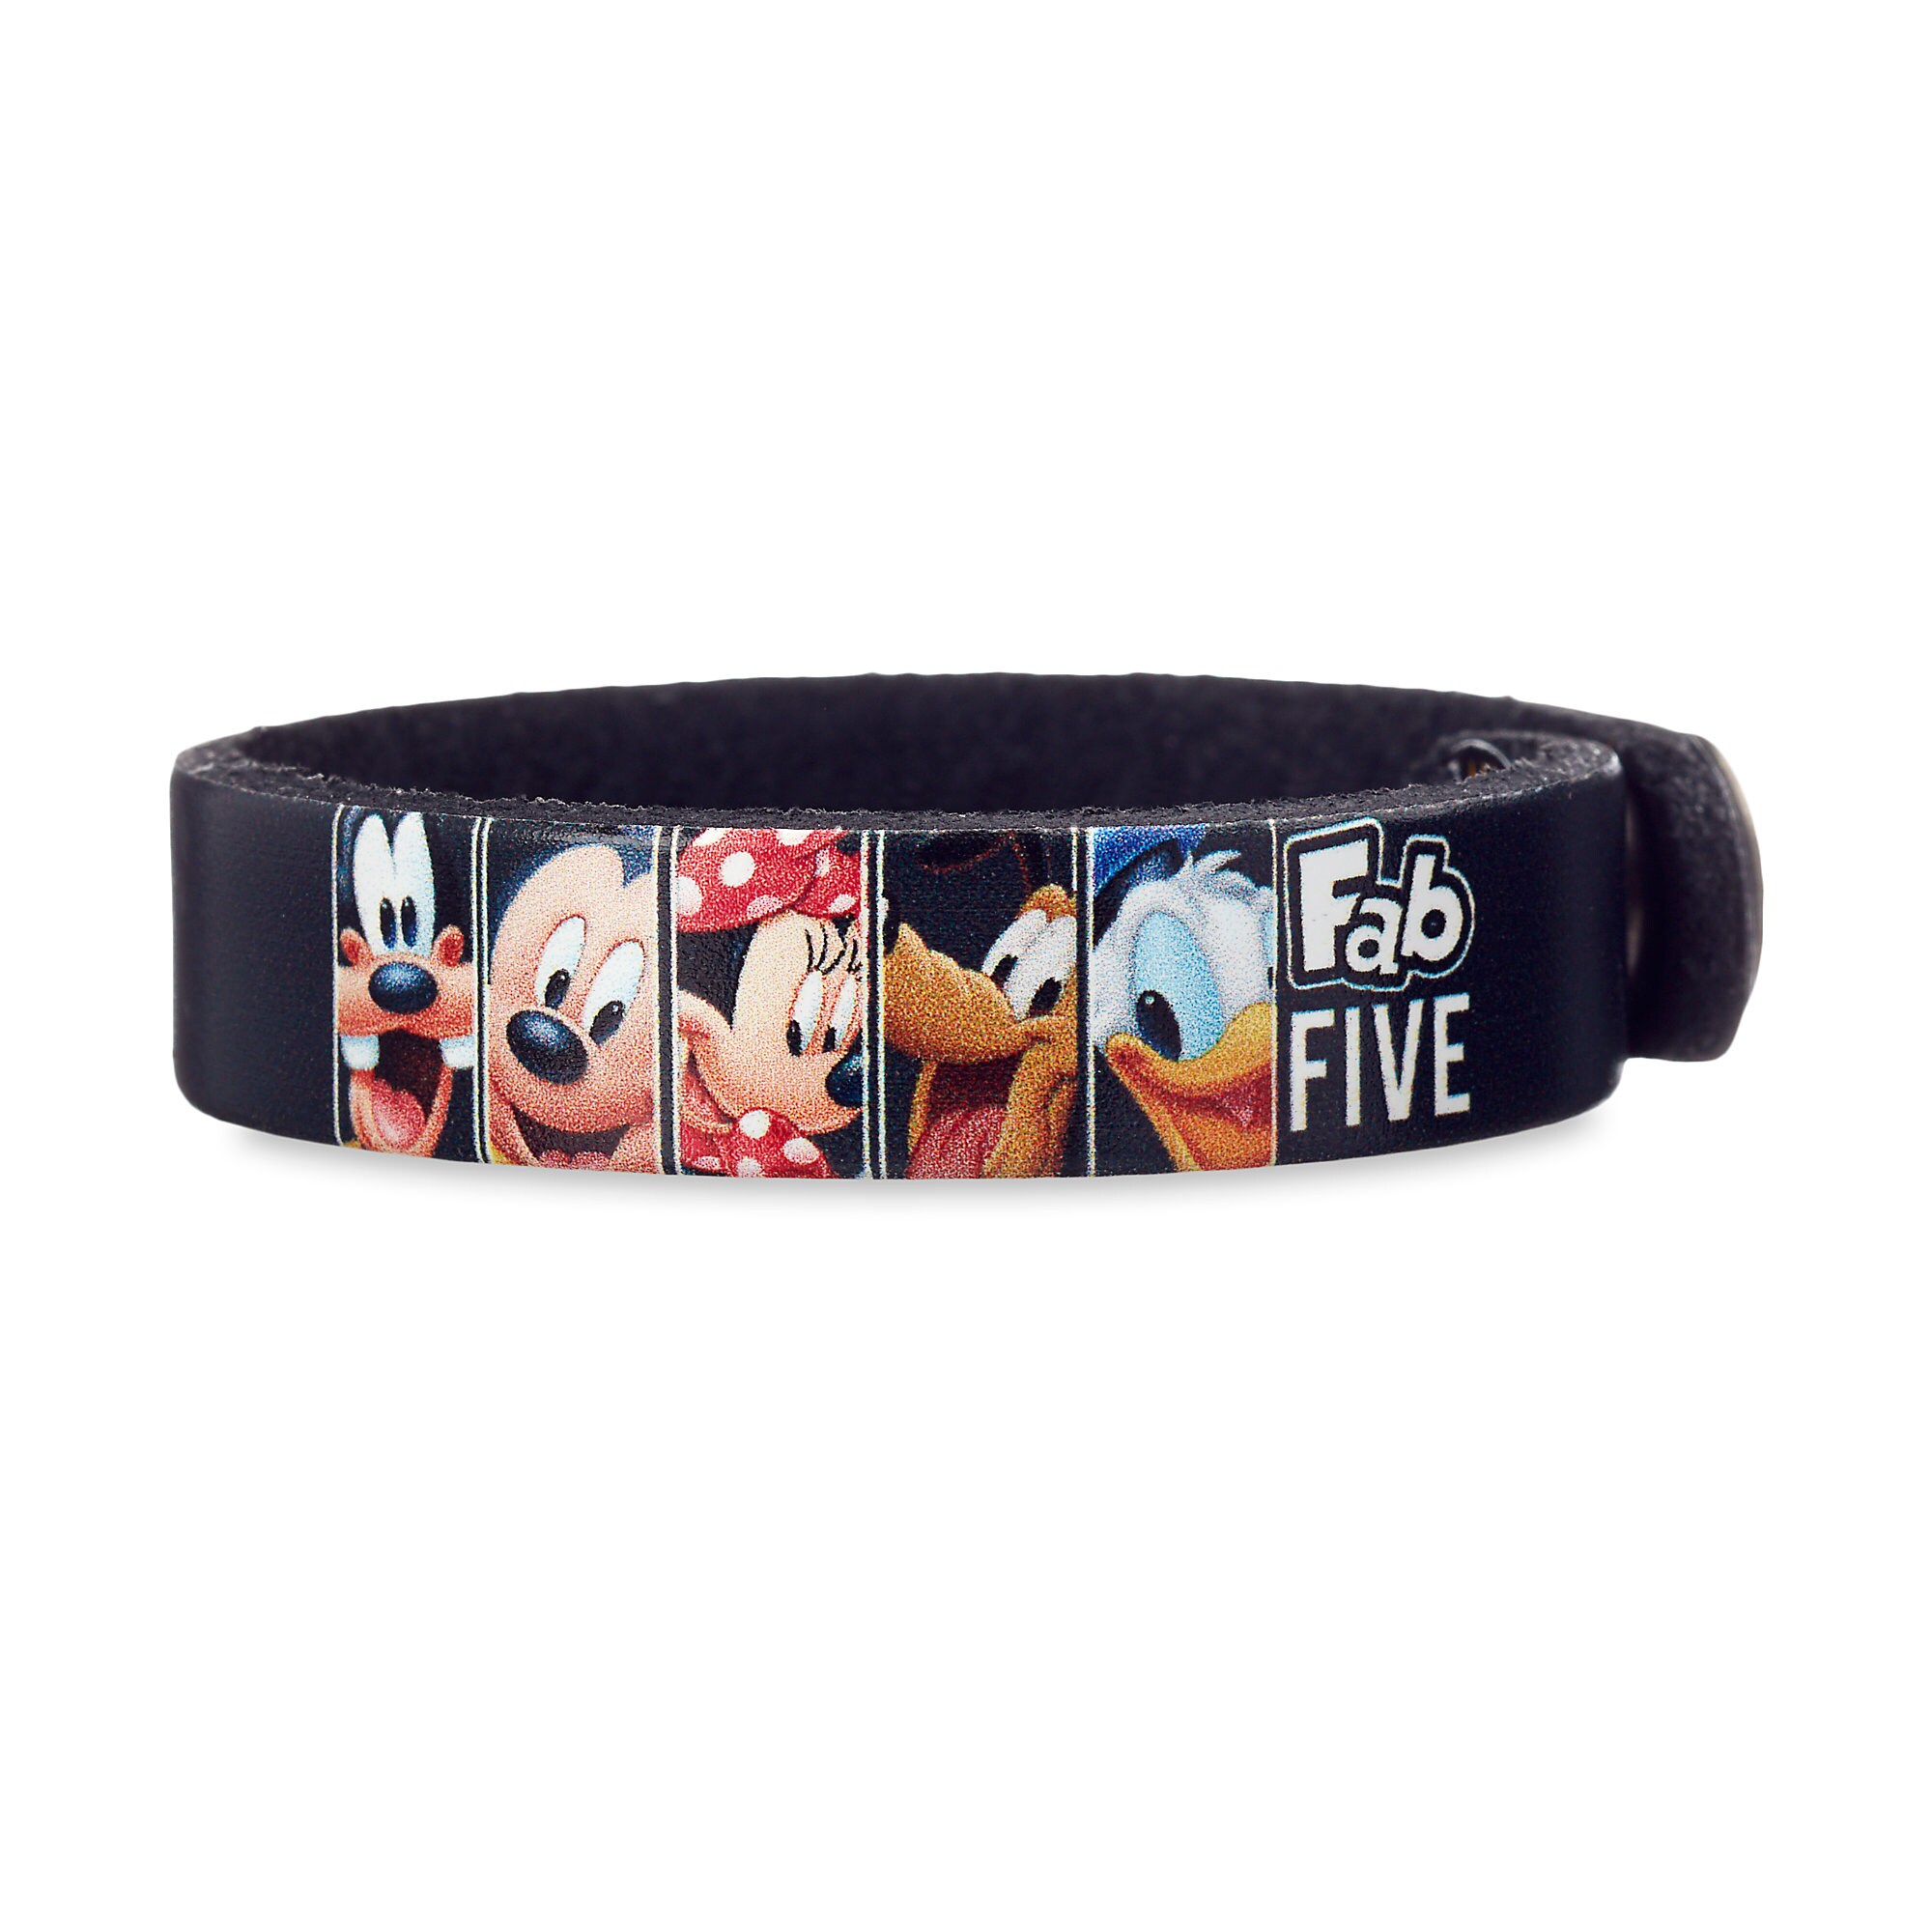 Mickey Mouse and Friends Leather Bracelet - Personalizable